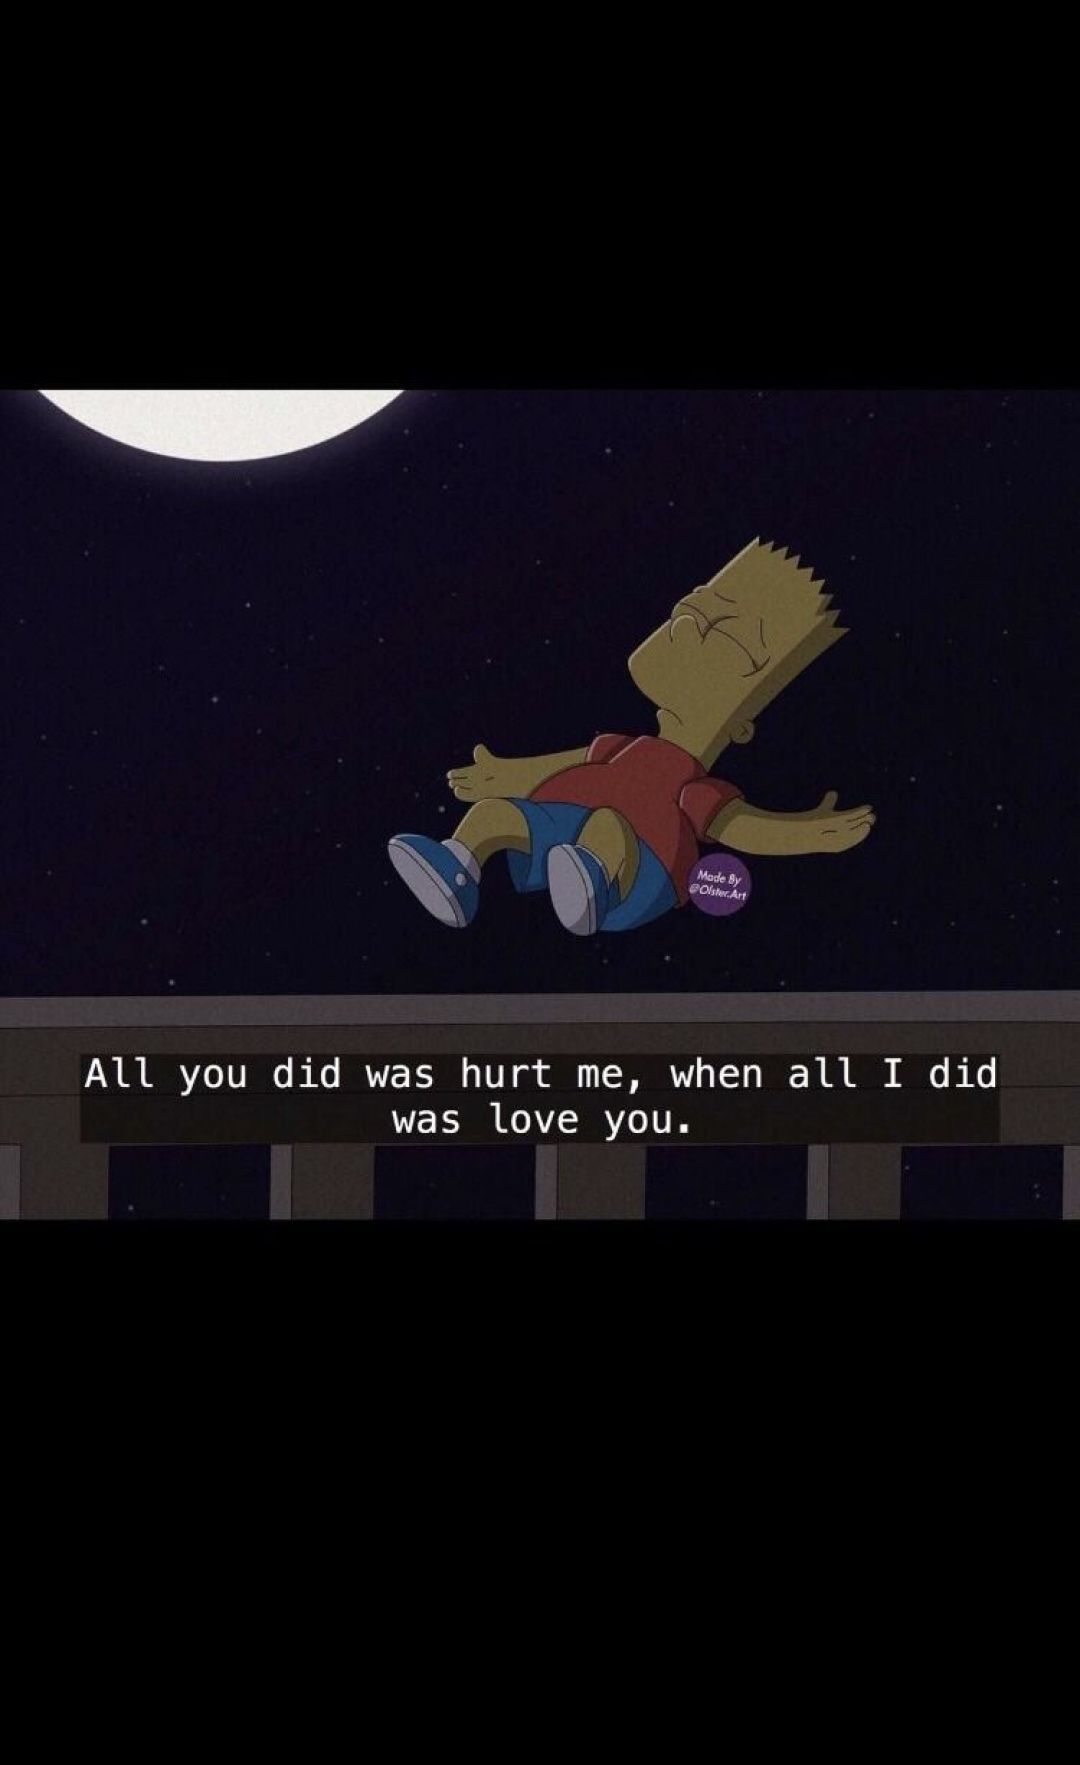 A cartoon character is laying on the ground with text that says all you did hurt me, when i loved - Sad quotes, Bart Simpson, depressing